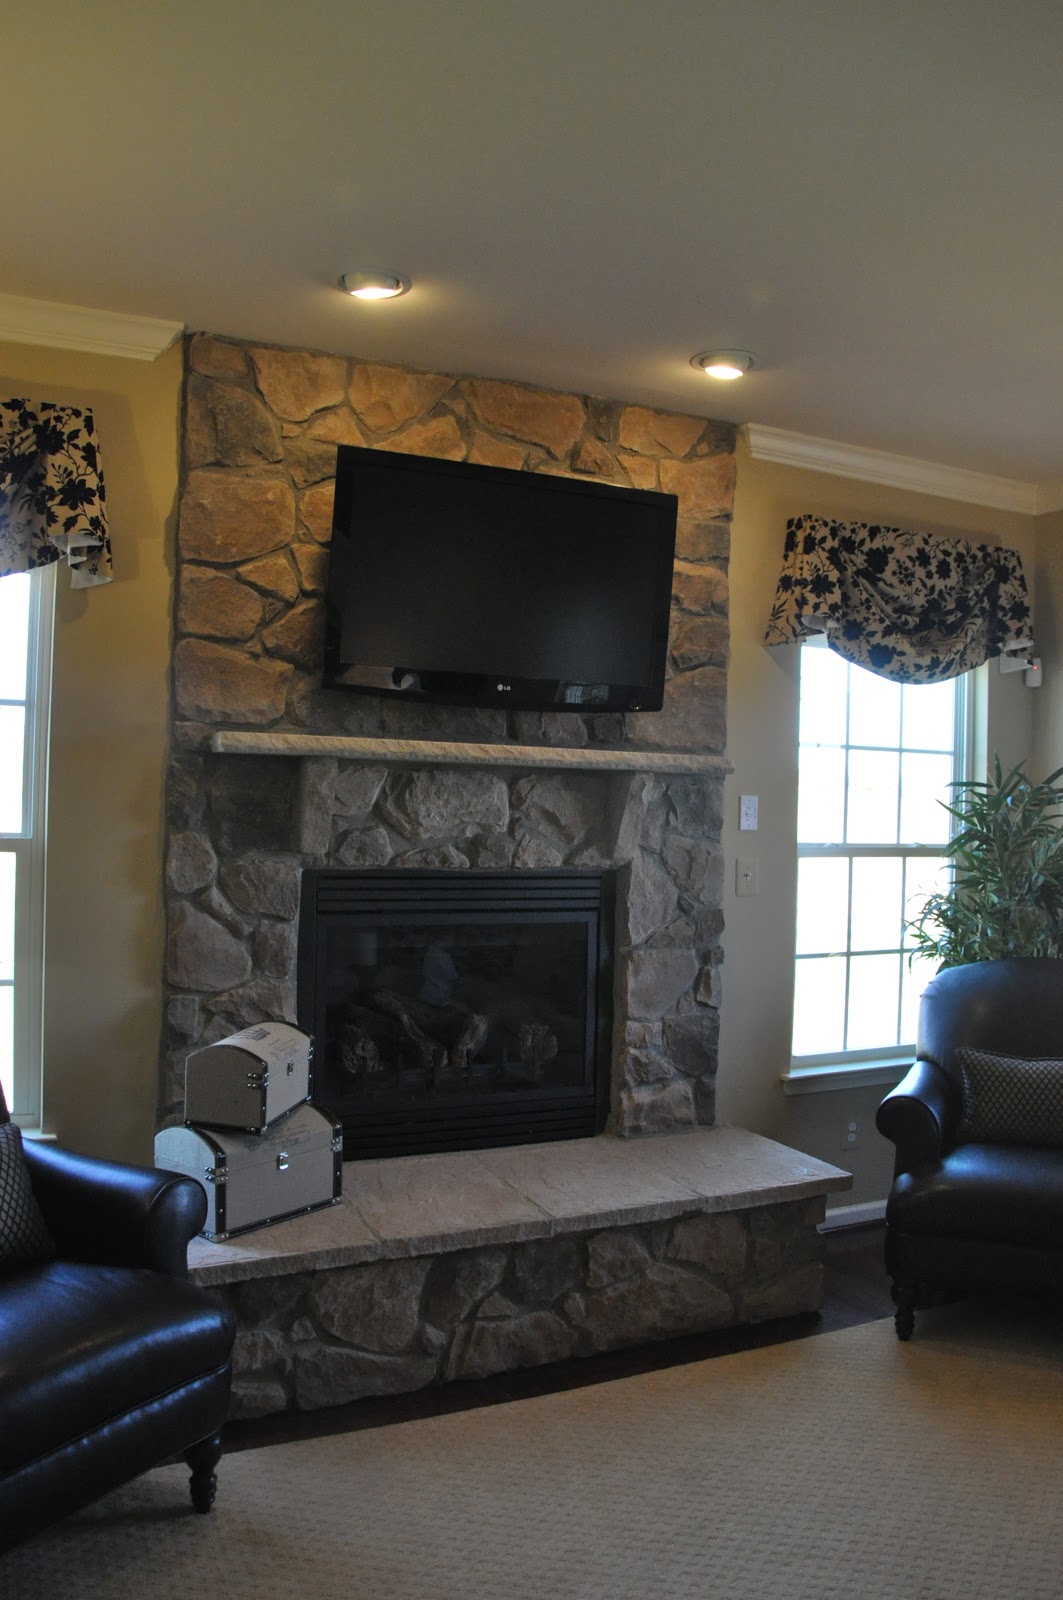 Building a Ryan Homes Ravenna: TV over the fireplace or not?